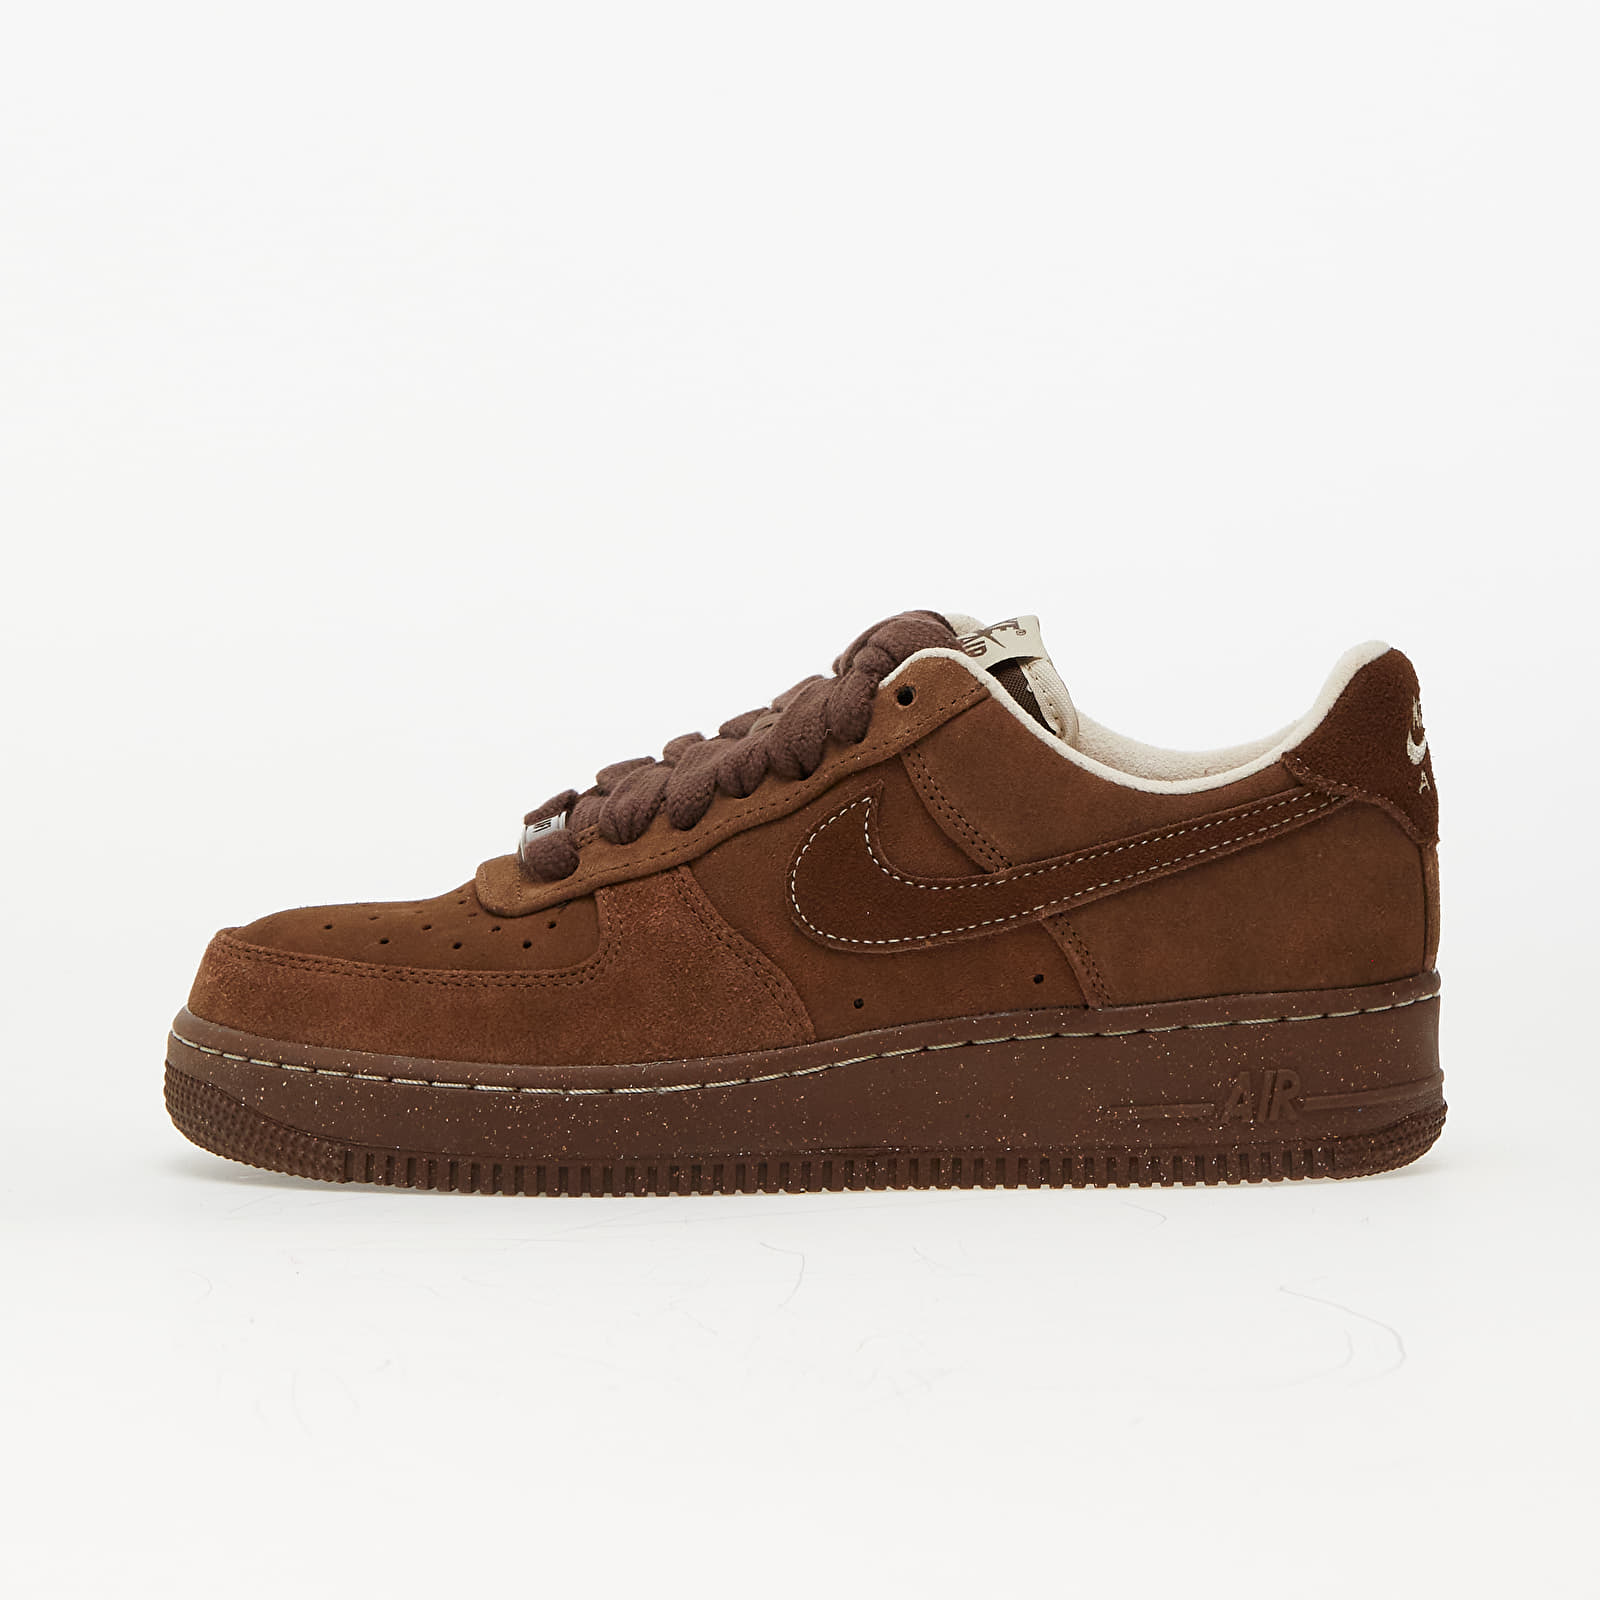 Buty damskie Nike Wmns Air Force 1 '07 Cacao Wow/ Cacao Wow